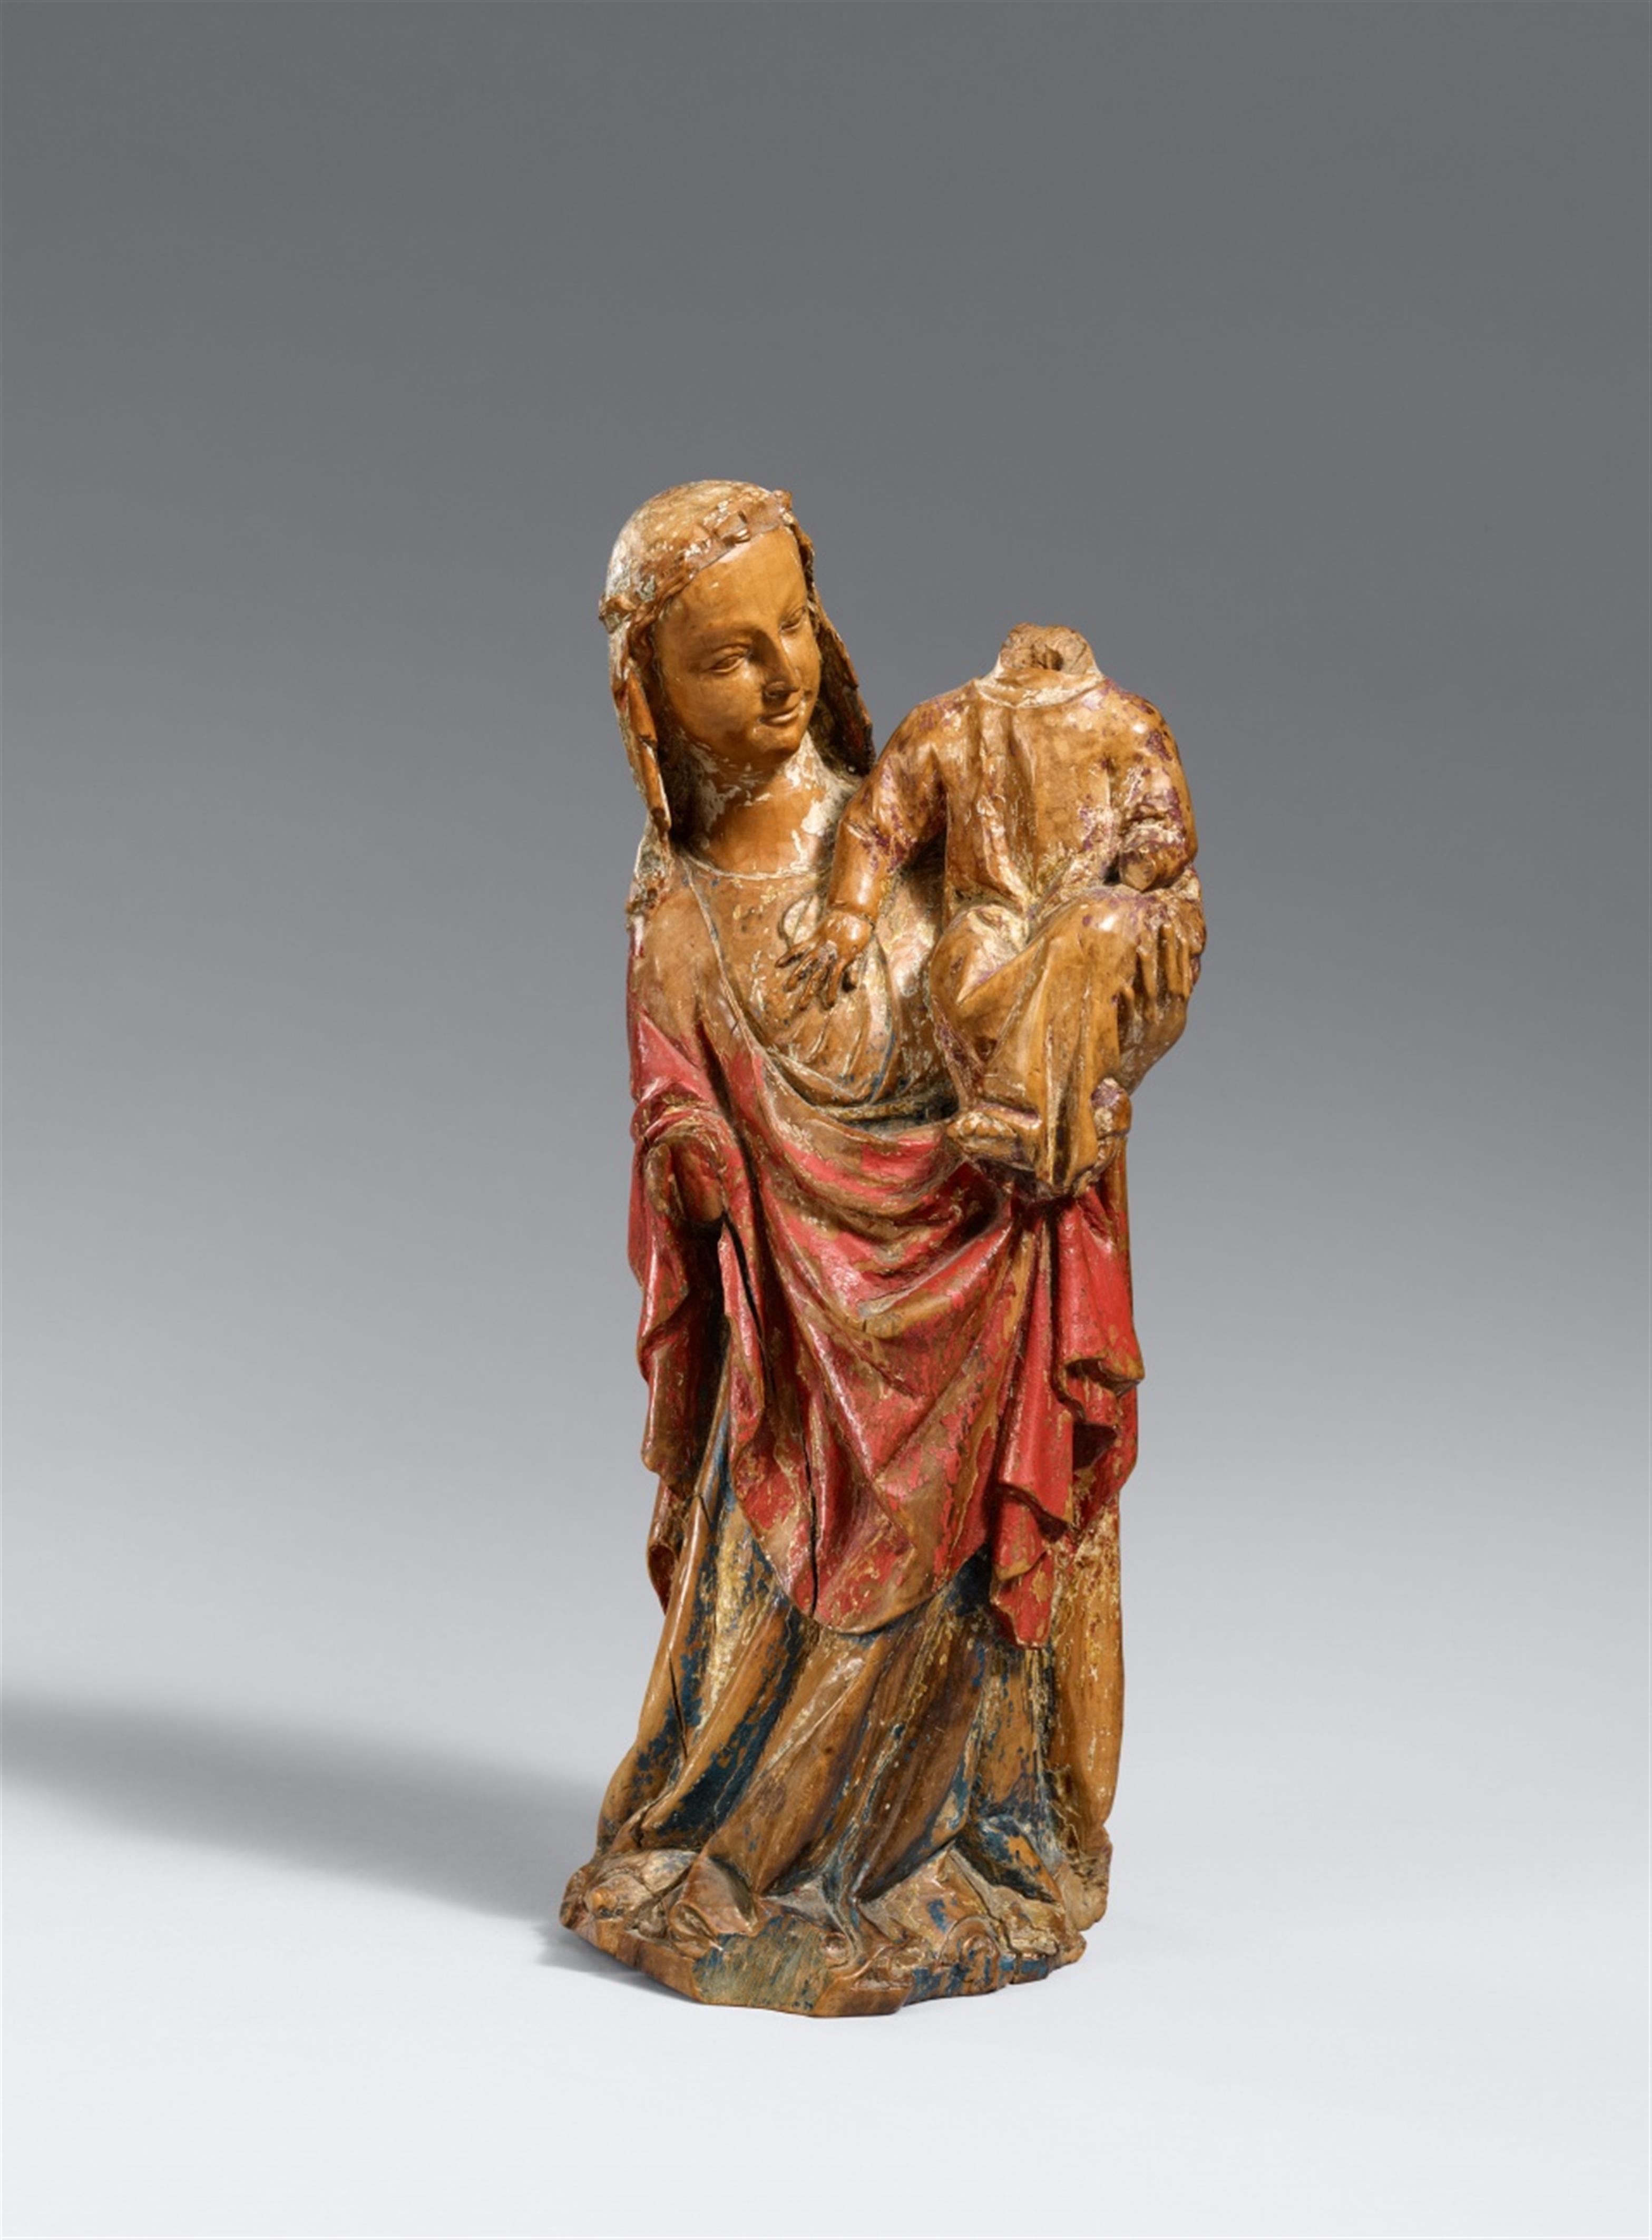 Northern France 3rd quarter 14th century - A Northern French wooden figure of the Virgin and Child, third quarter 14th century - image-1